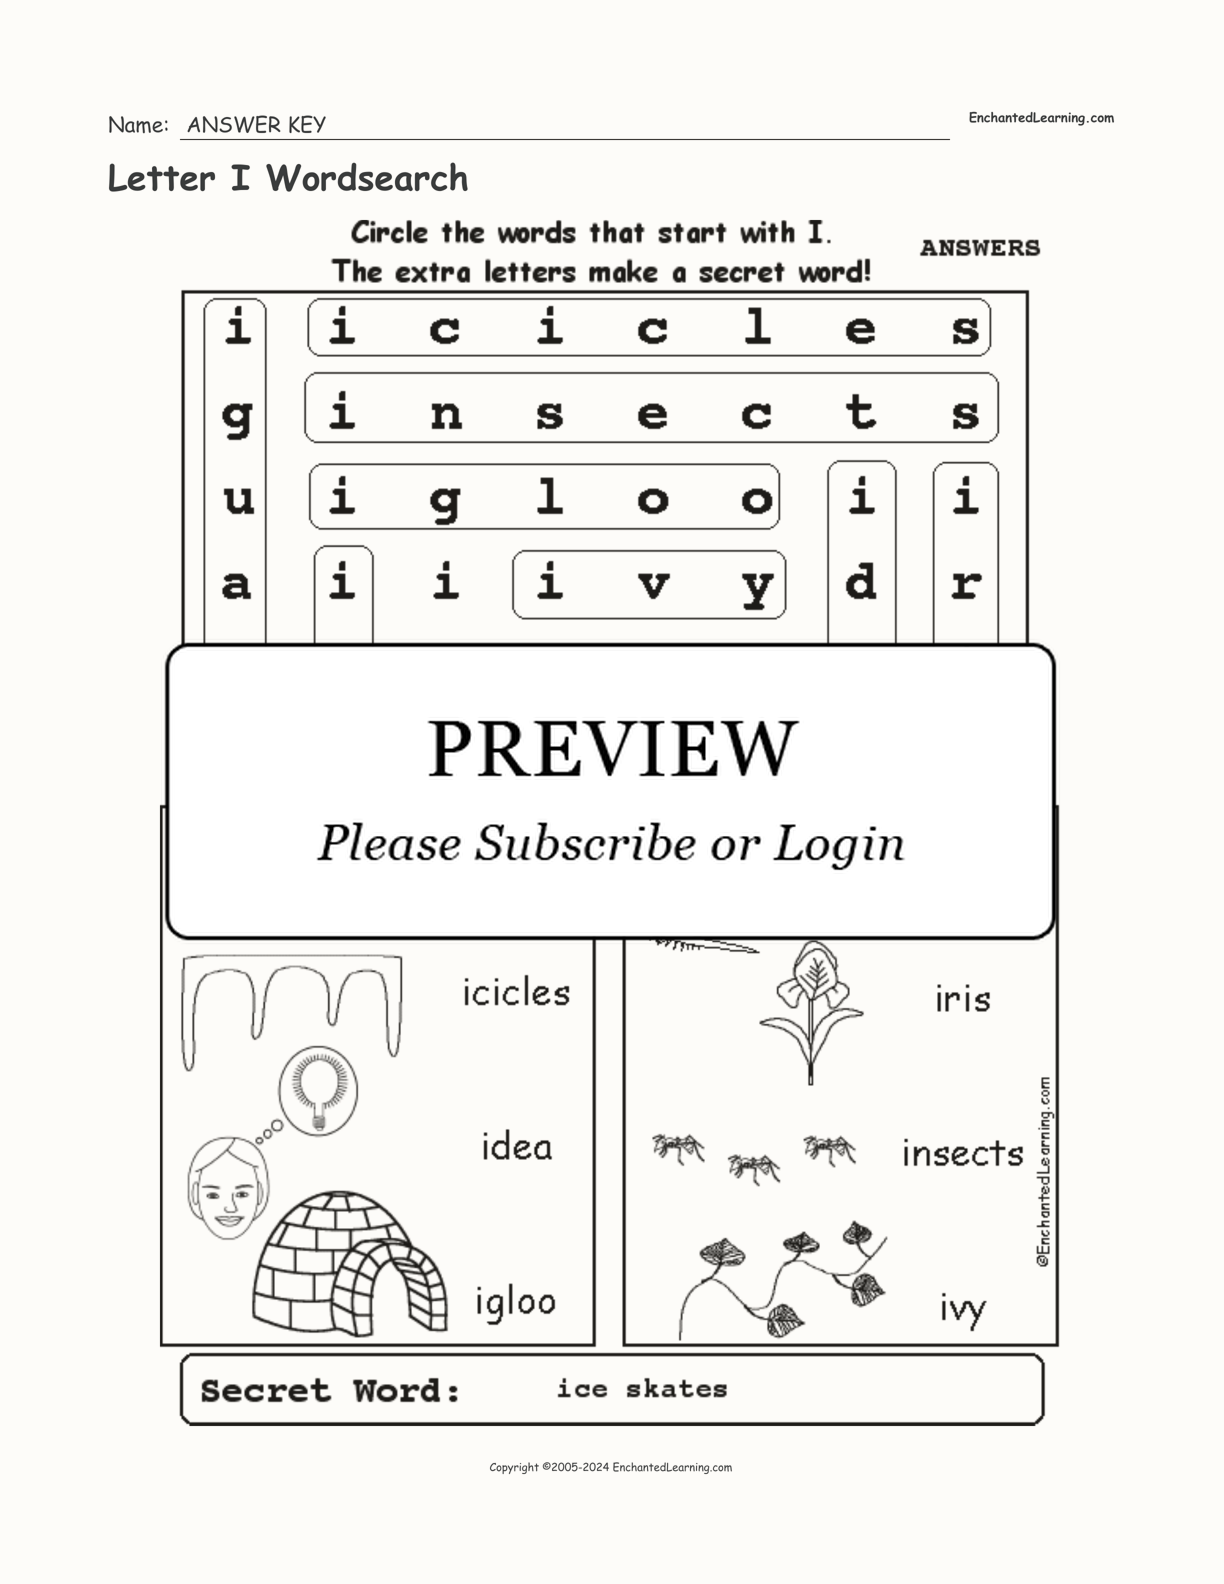 Letter I Wordsearch interactive worksheet page 2